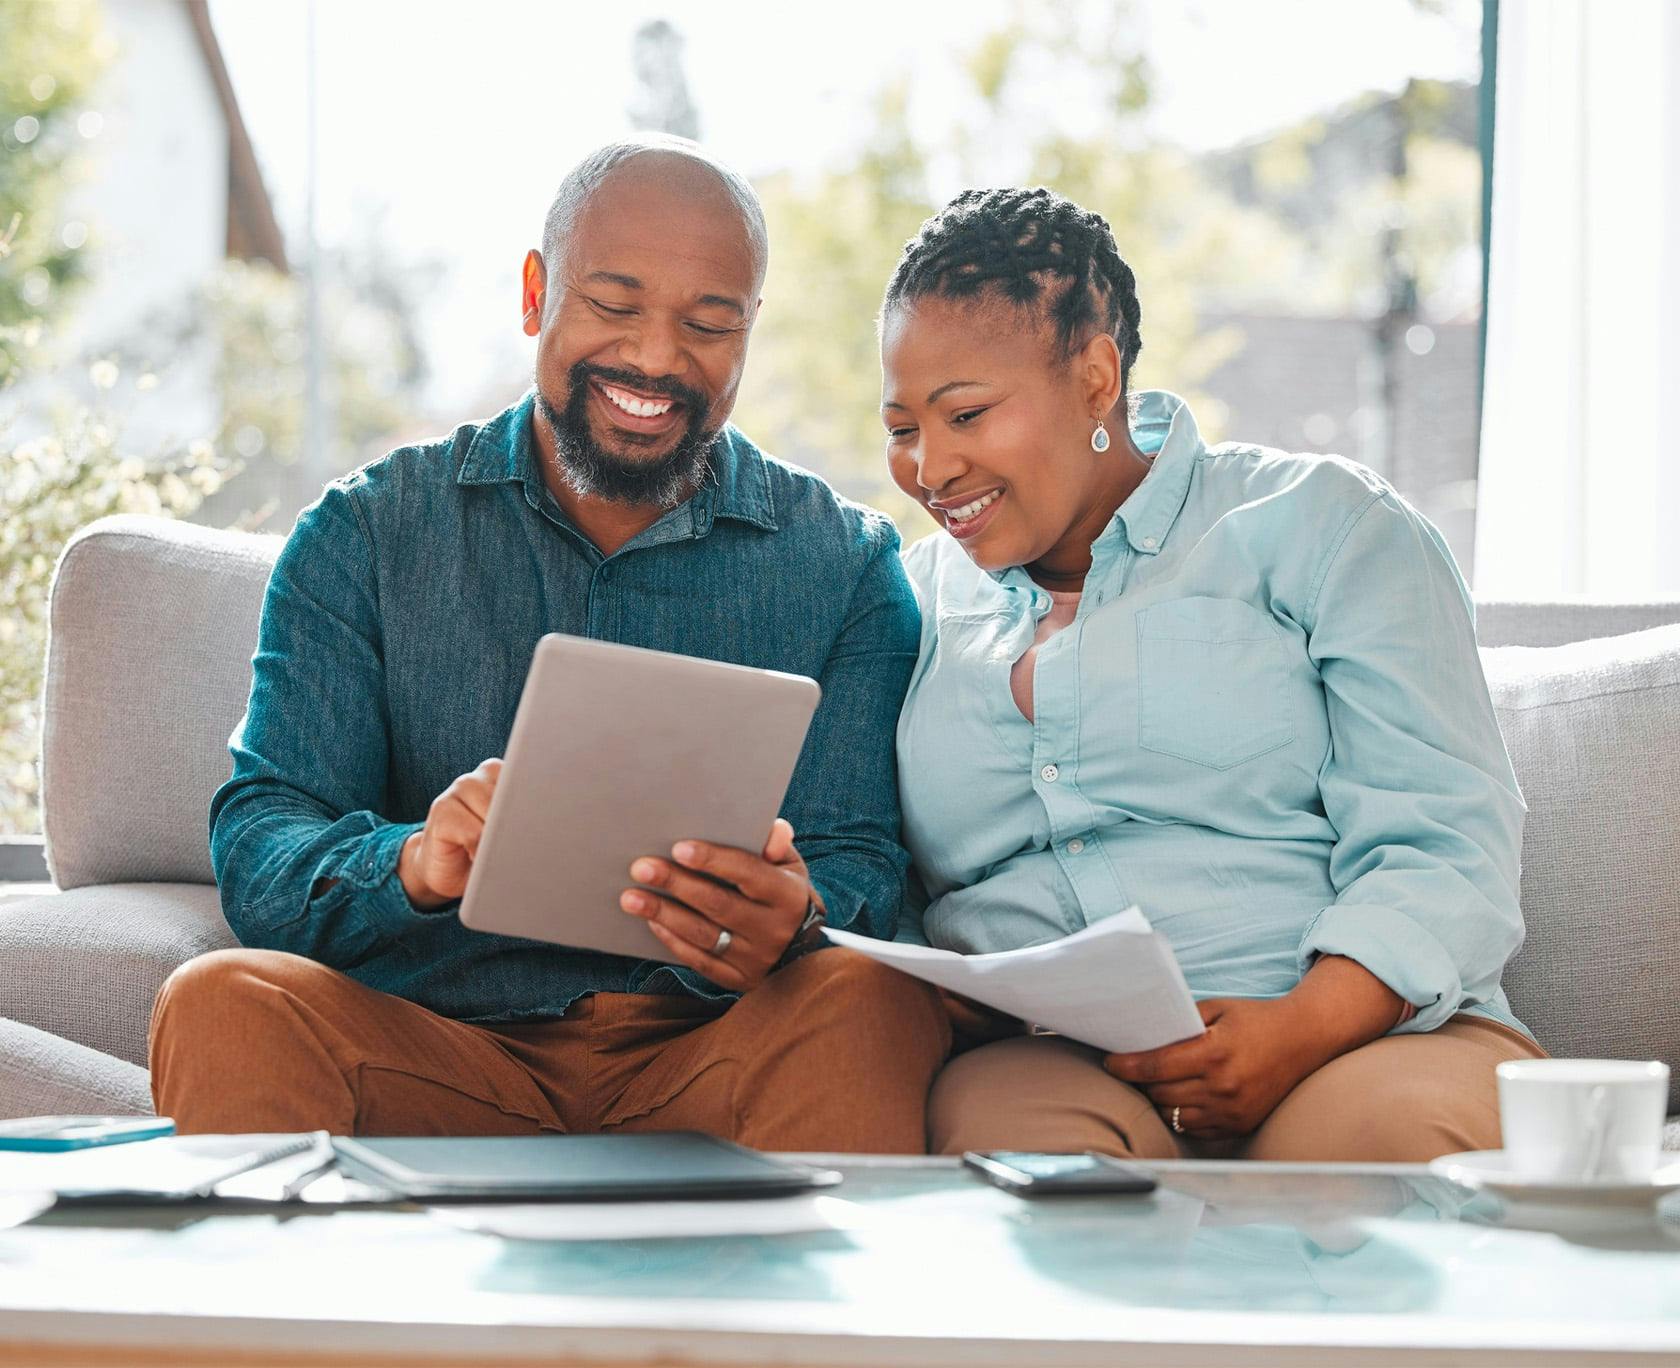 Man and woman sitting on a couch looking at an ipad